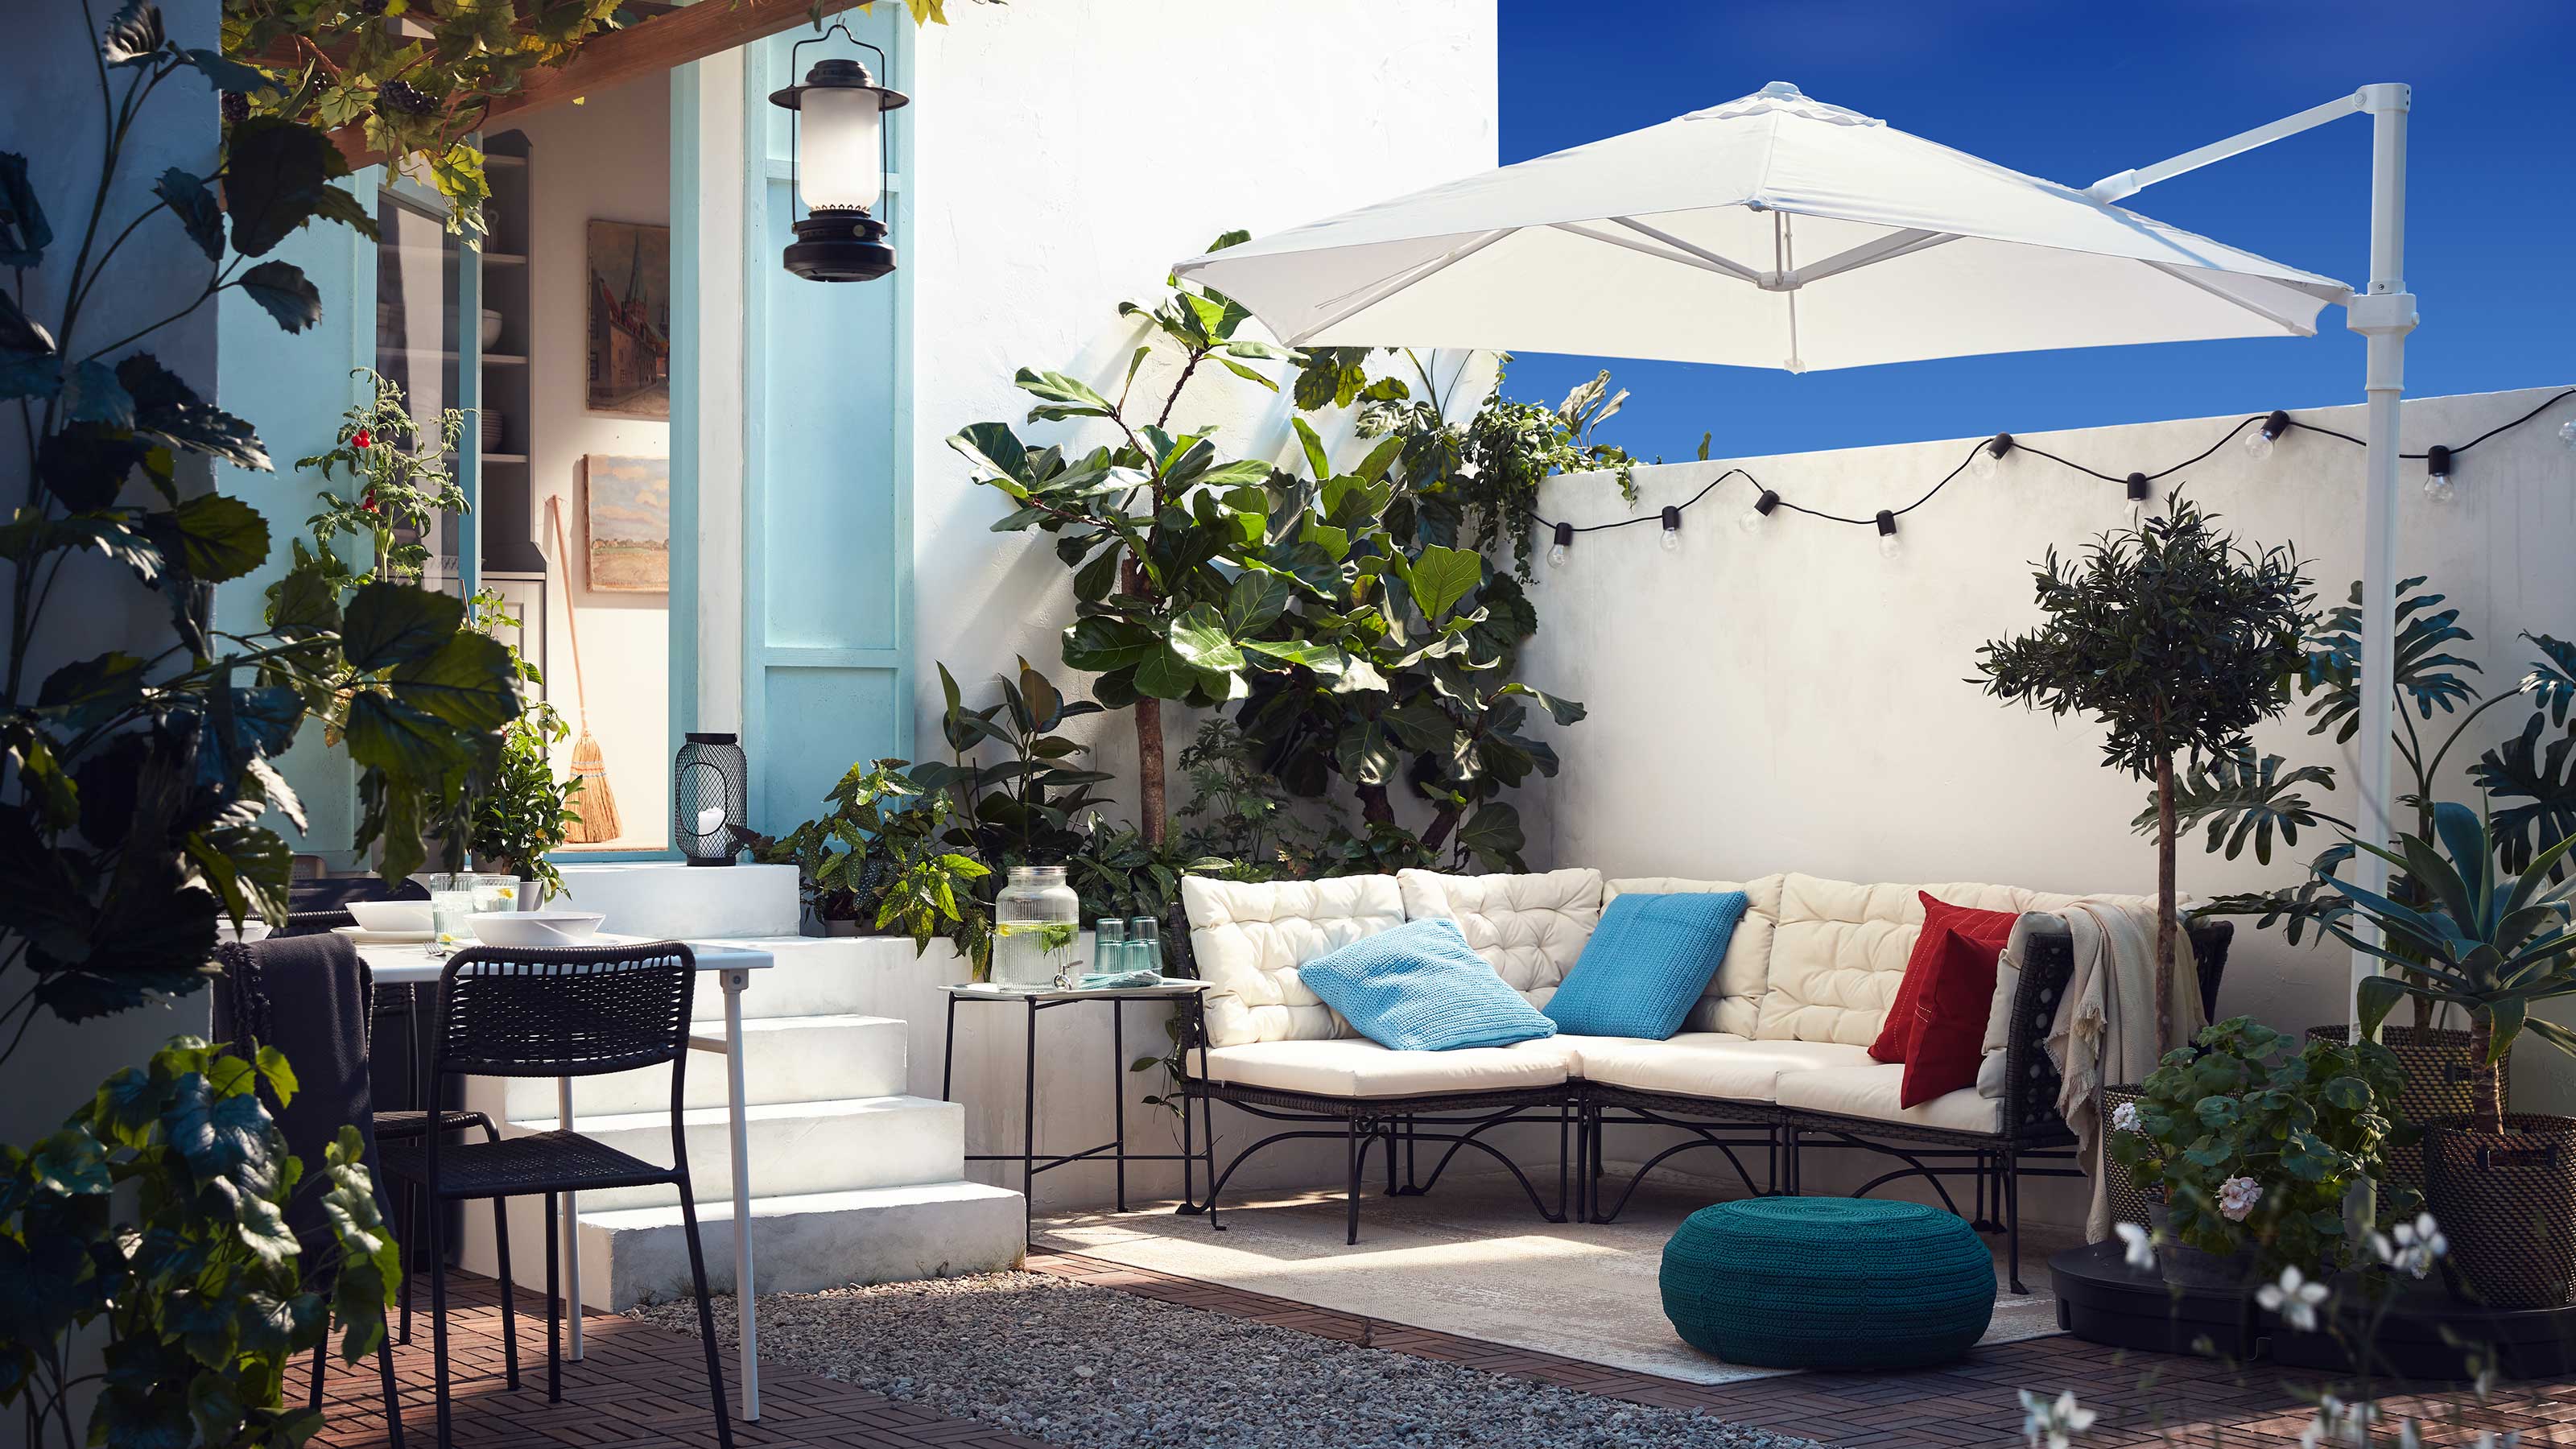 Shade ideas for patios, gardens and backyards 18 chic ways to ...